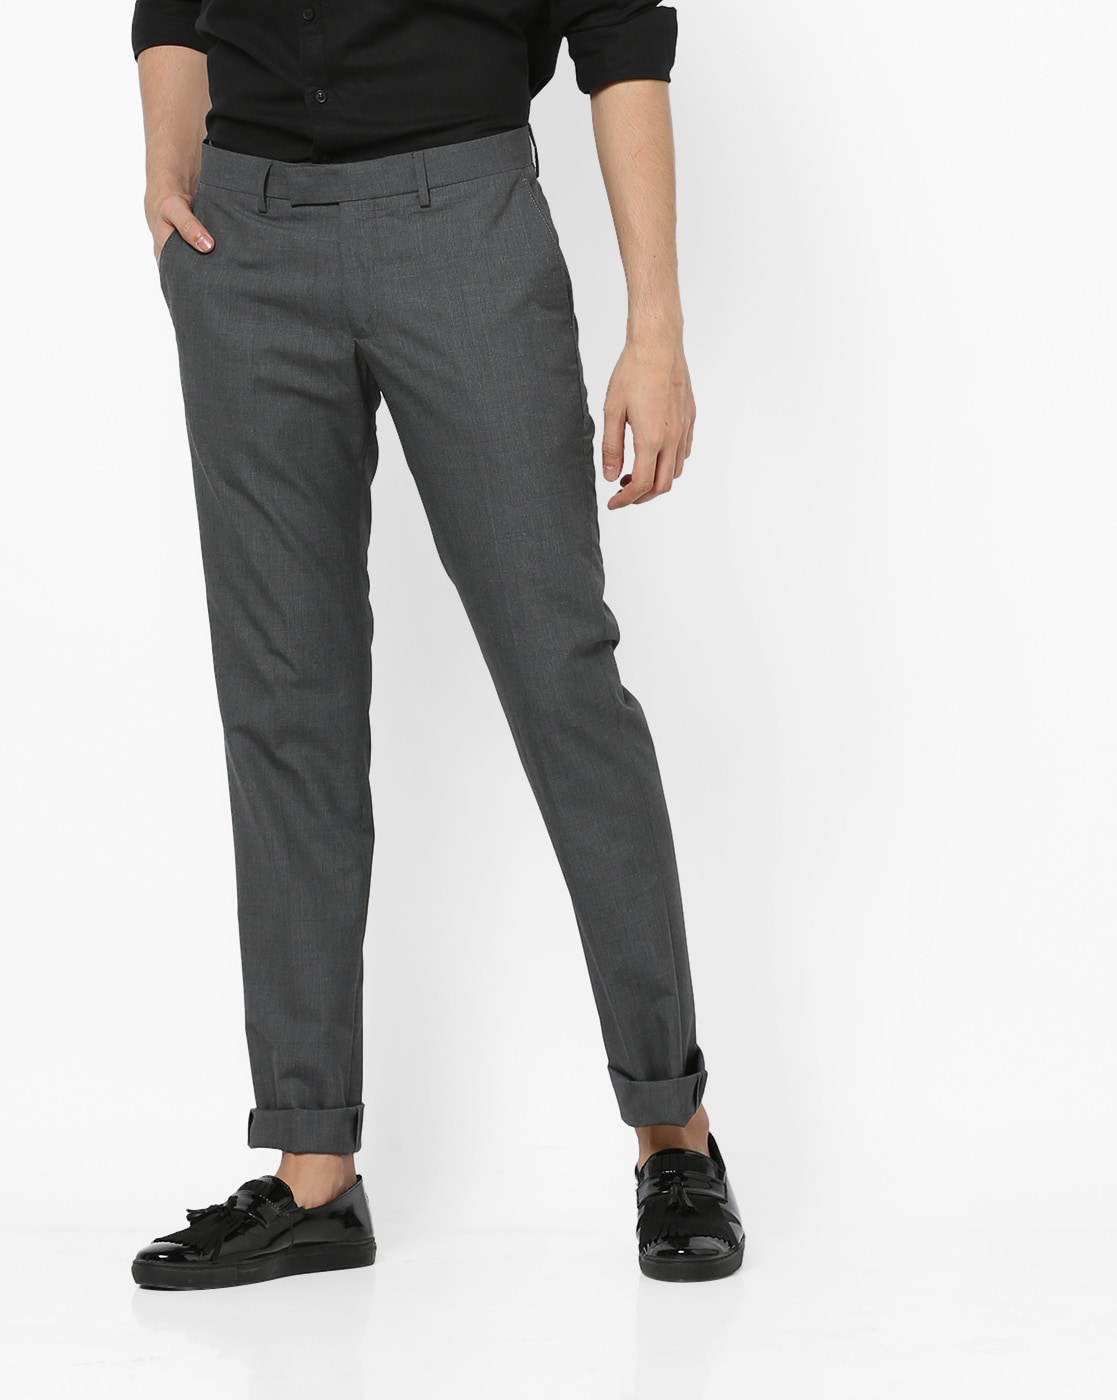 Collection more than 110 dark grey trousers